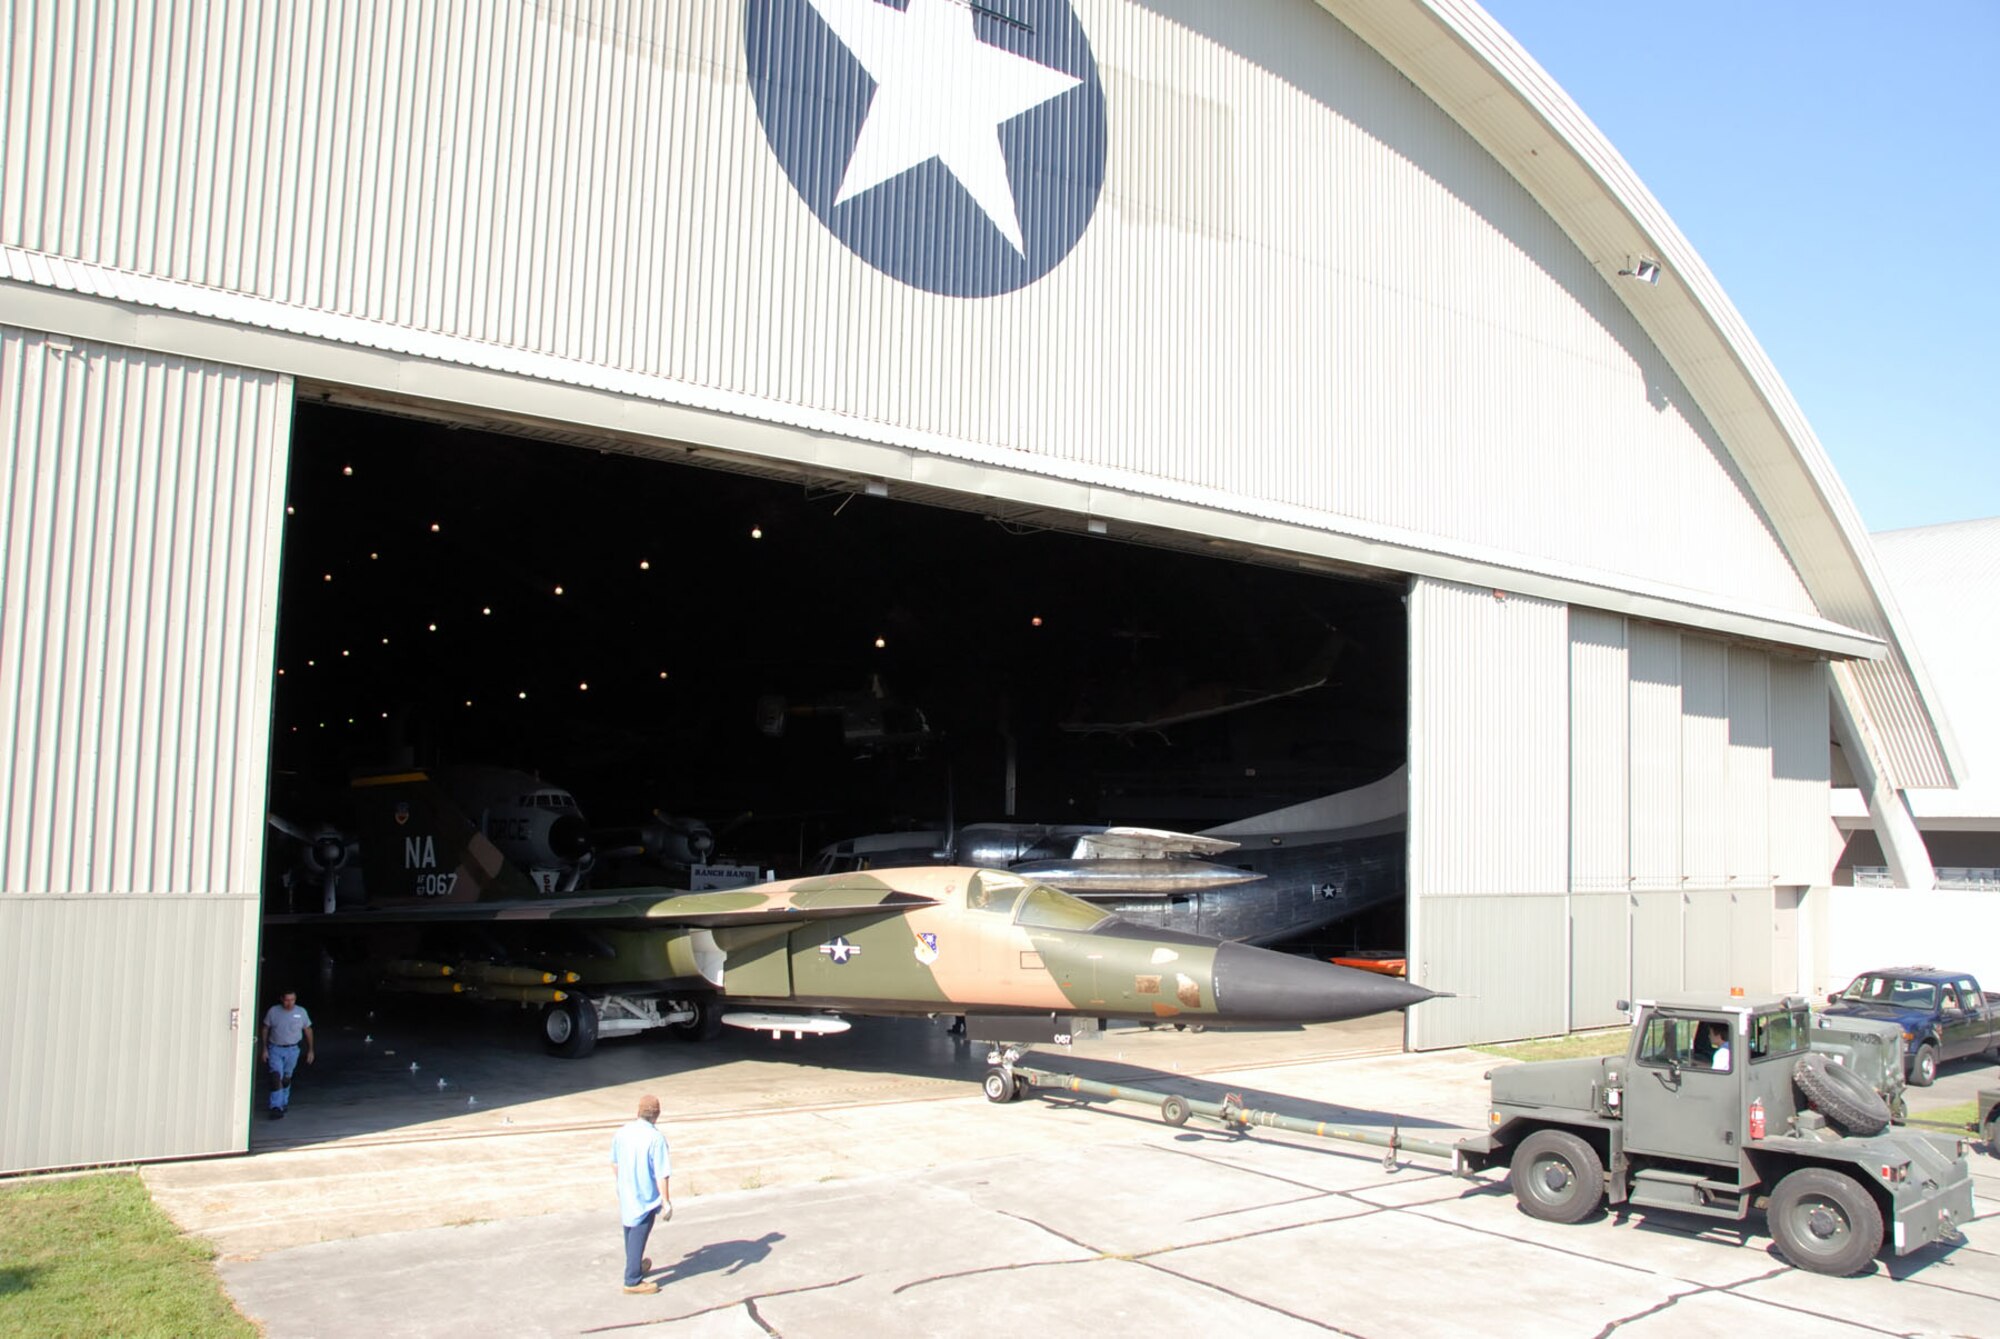 DAYTON, Ohio (08/2010) -- Restoration specialists move aircraft as part of the Southeast Asia War exhibit renovation. (U.S. Air Force photo)